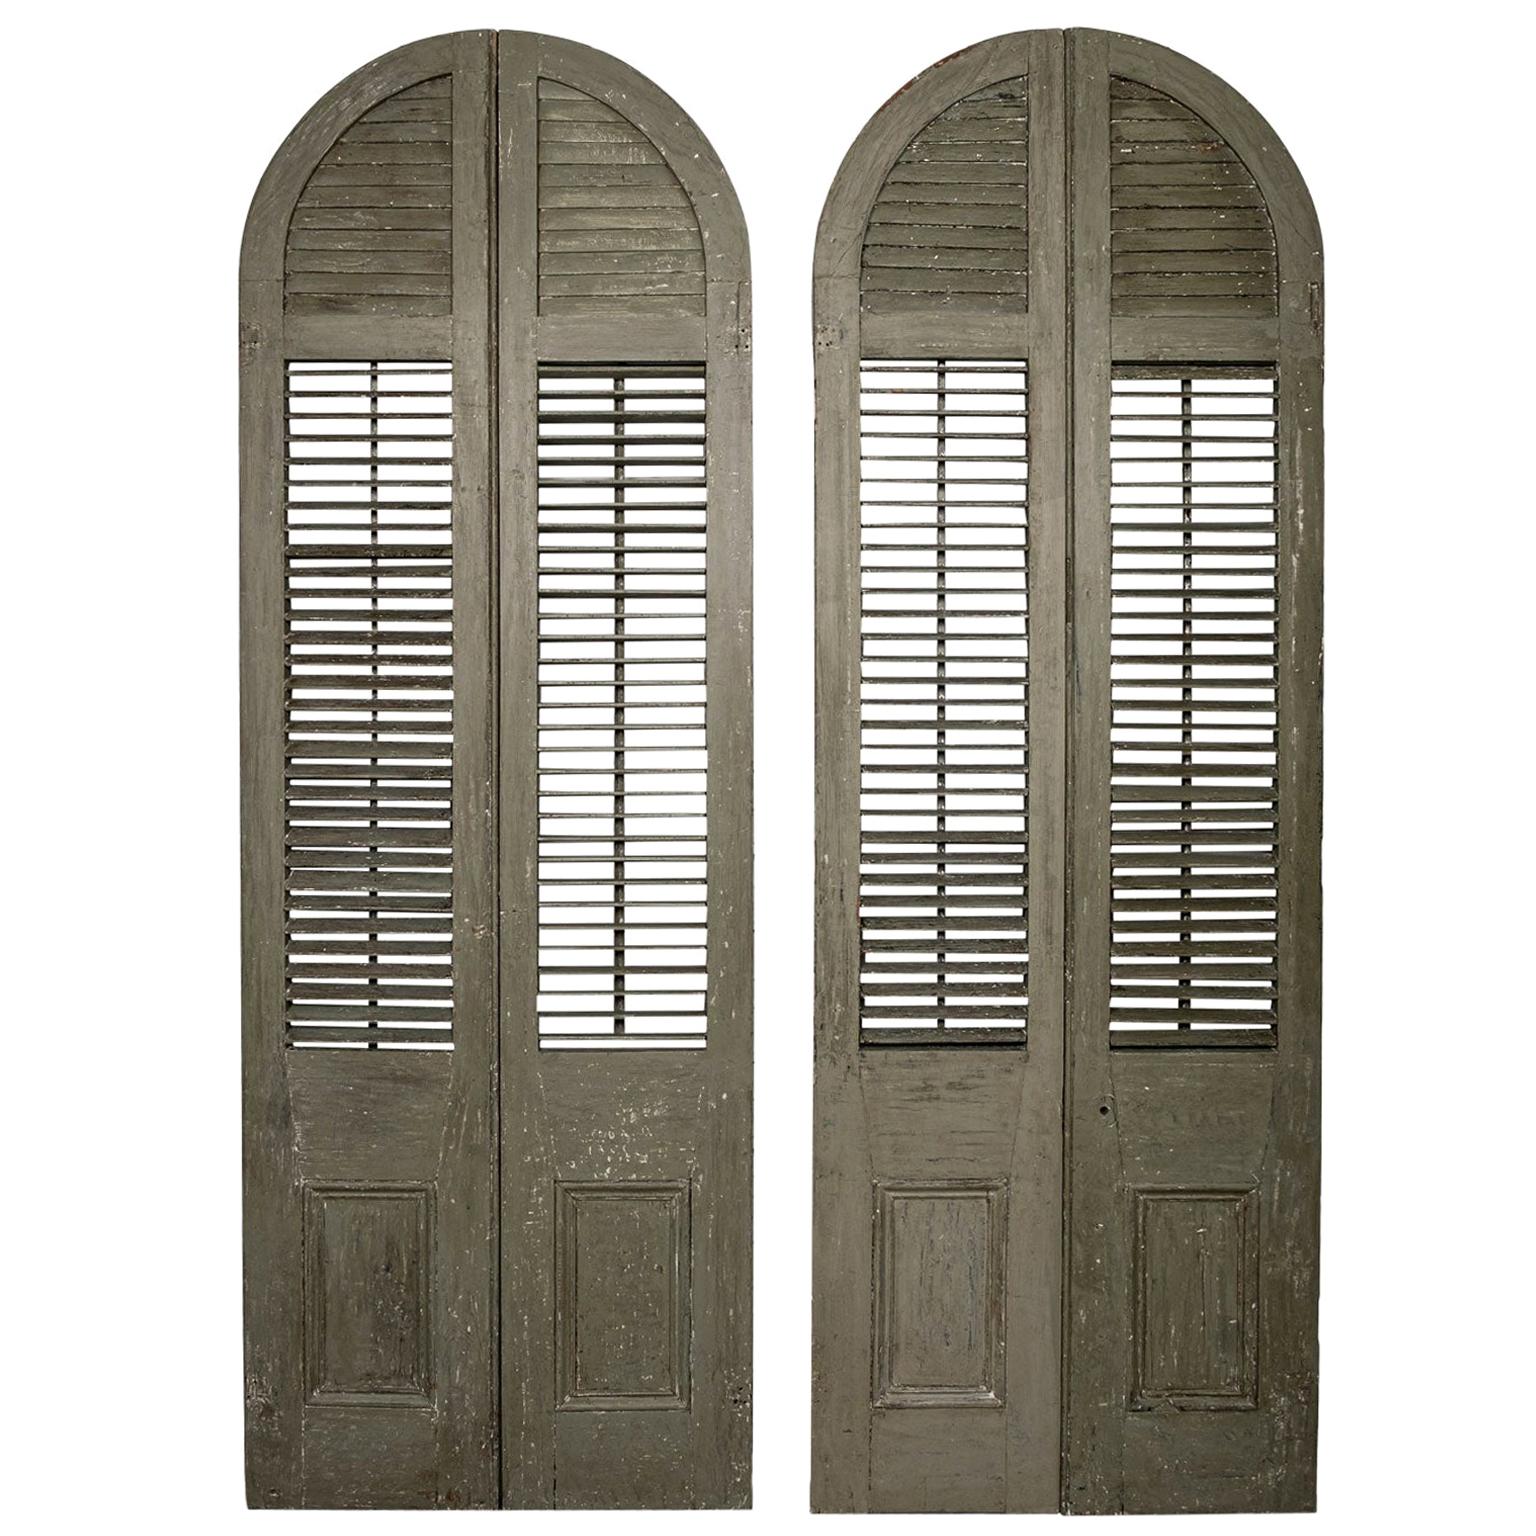 Two Pairs of Green-Painted Arched Shutters